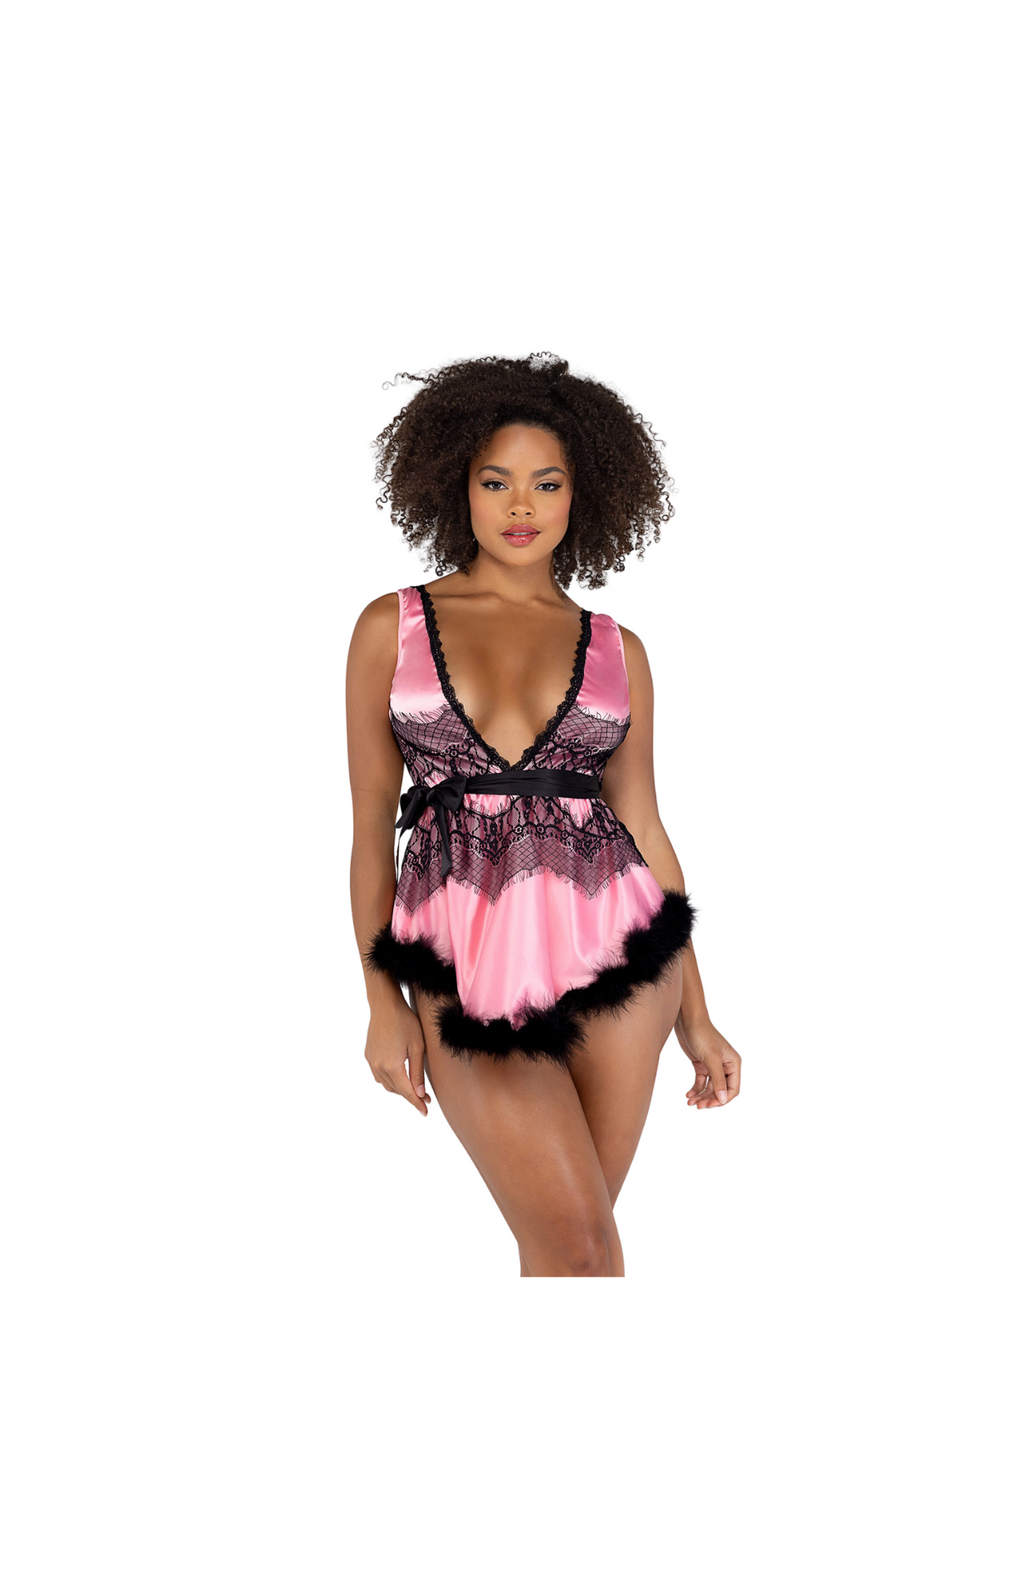 NEW 2PC Pink Black Satin & Lace Babydoll with Tie 